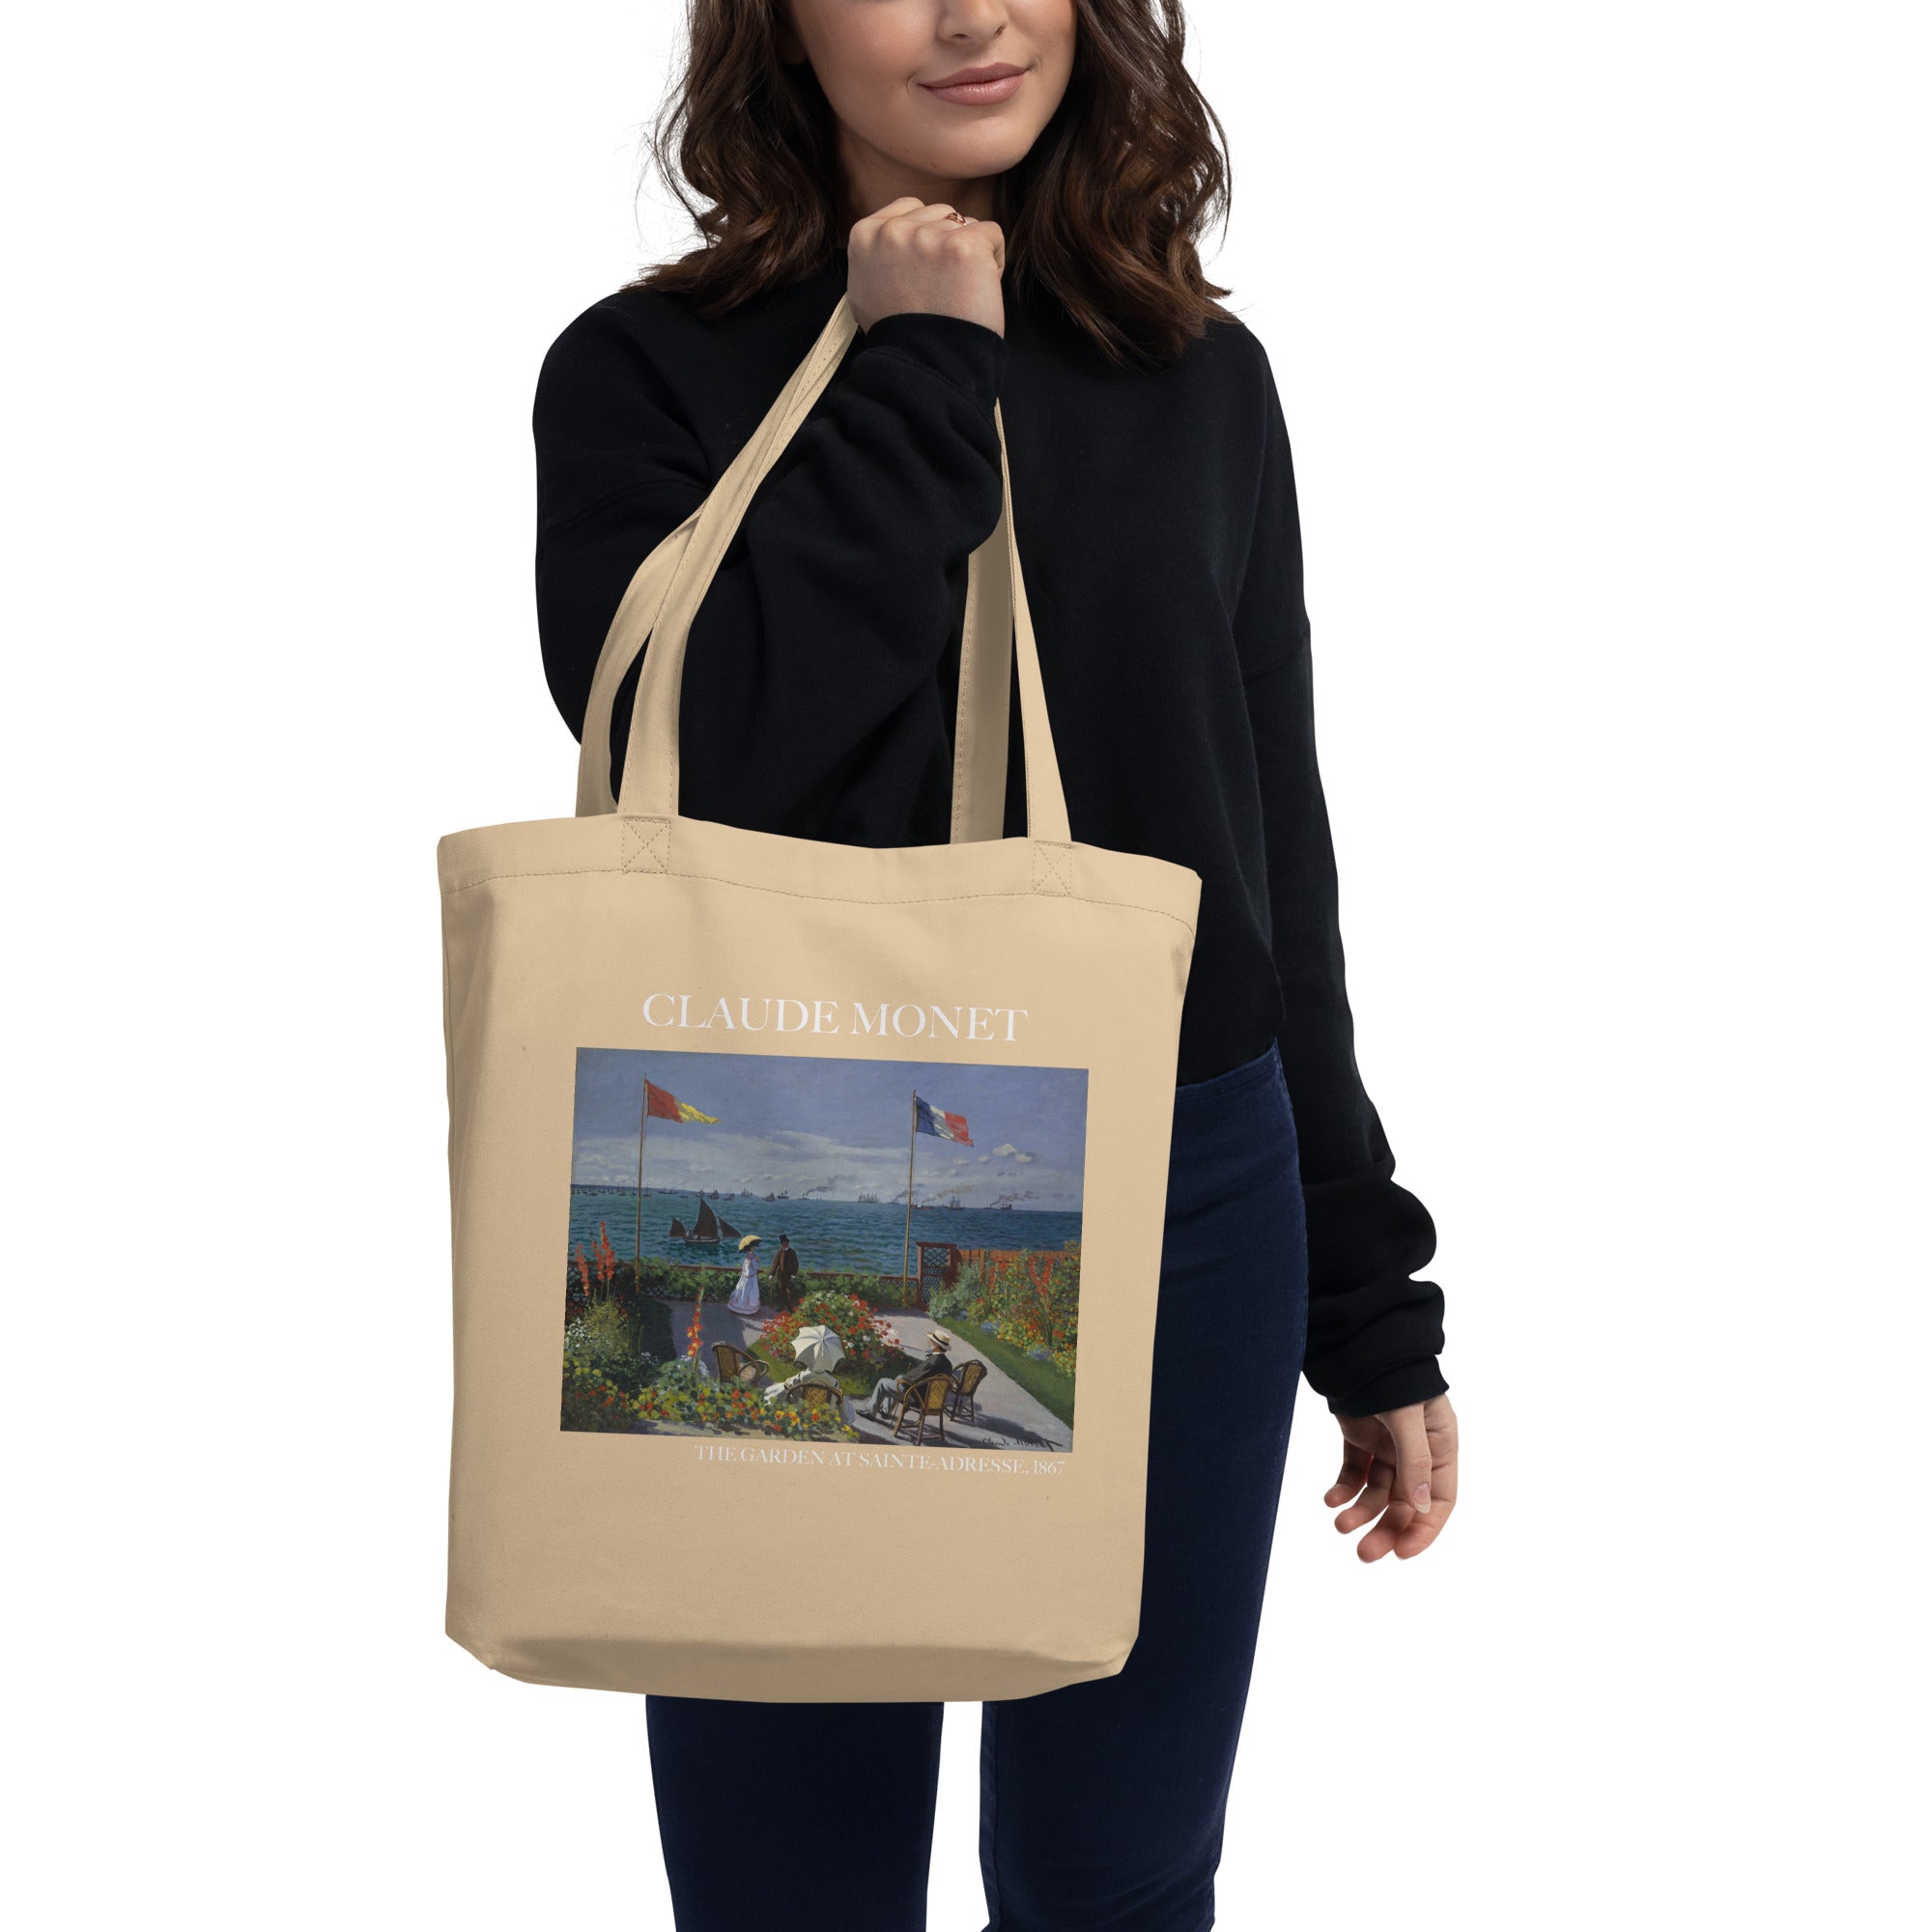 Hieronymus Bosch 'The Garden of Earthly Delights' Famous Painting Totebag | Eco Friendly Art Tote Bag